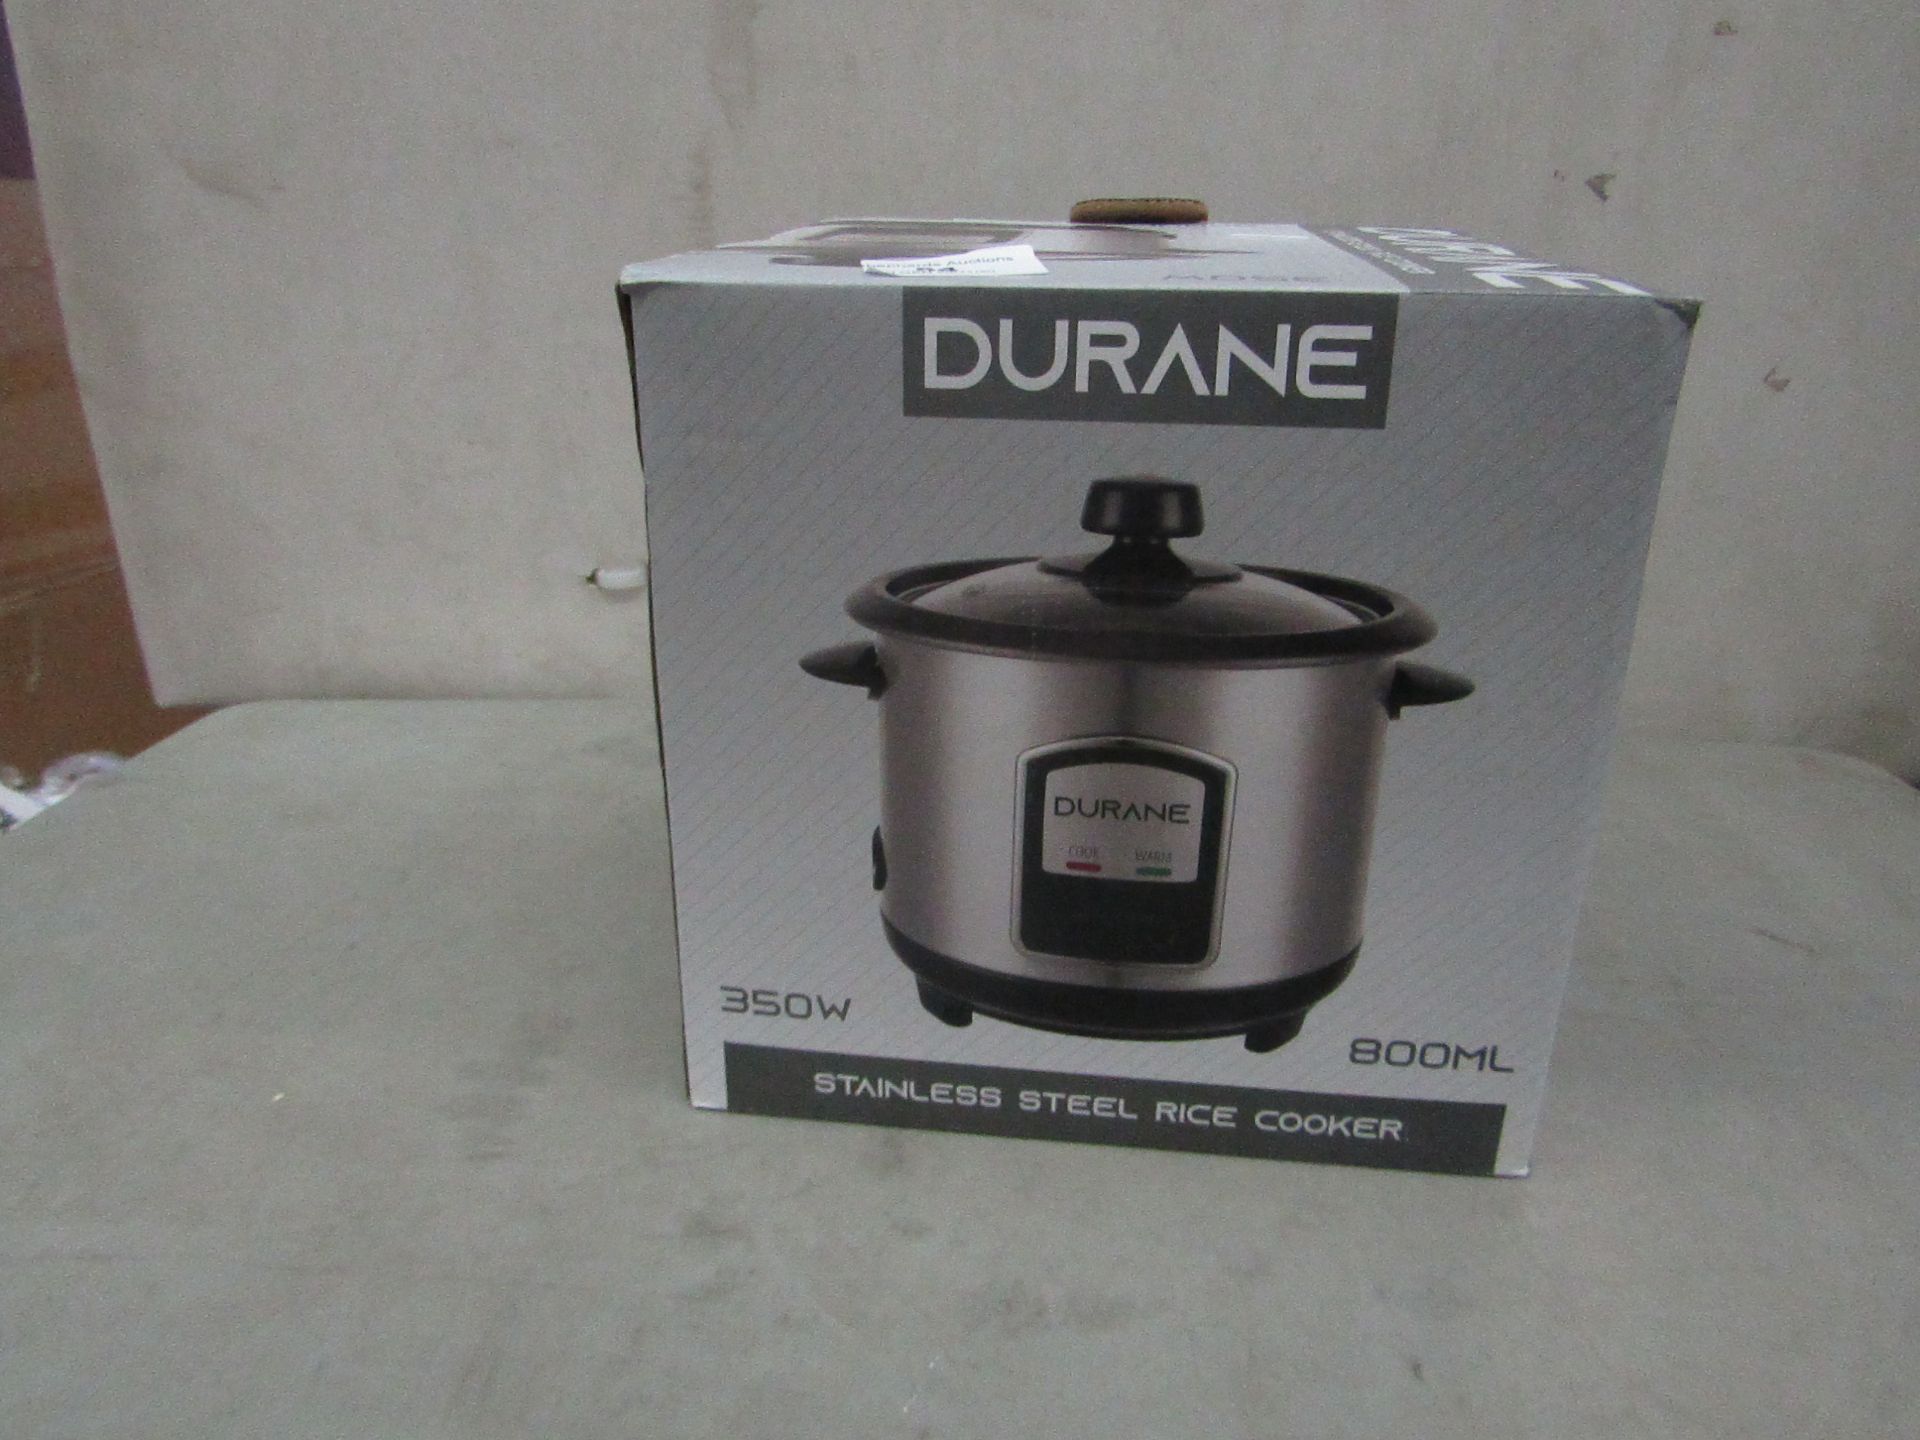 Durane - 350w Stainless Steel Rice Cooker - Unused & Boxed.